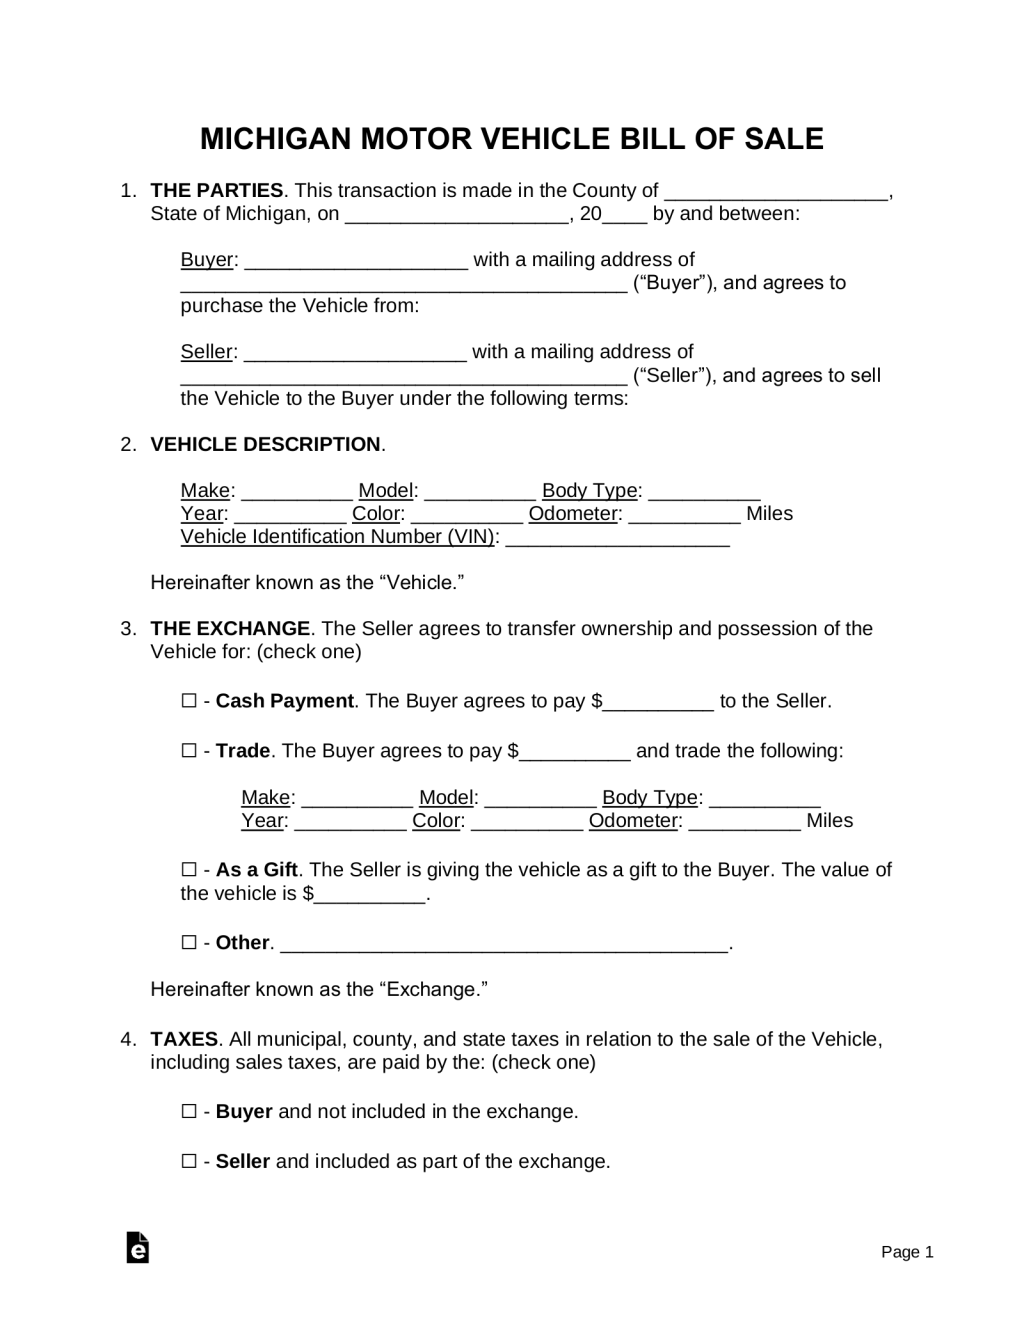 Picture of: Free Michigan Motor Vehicle Bill of Sale – PDF  Word – eForms